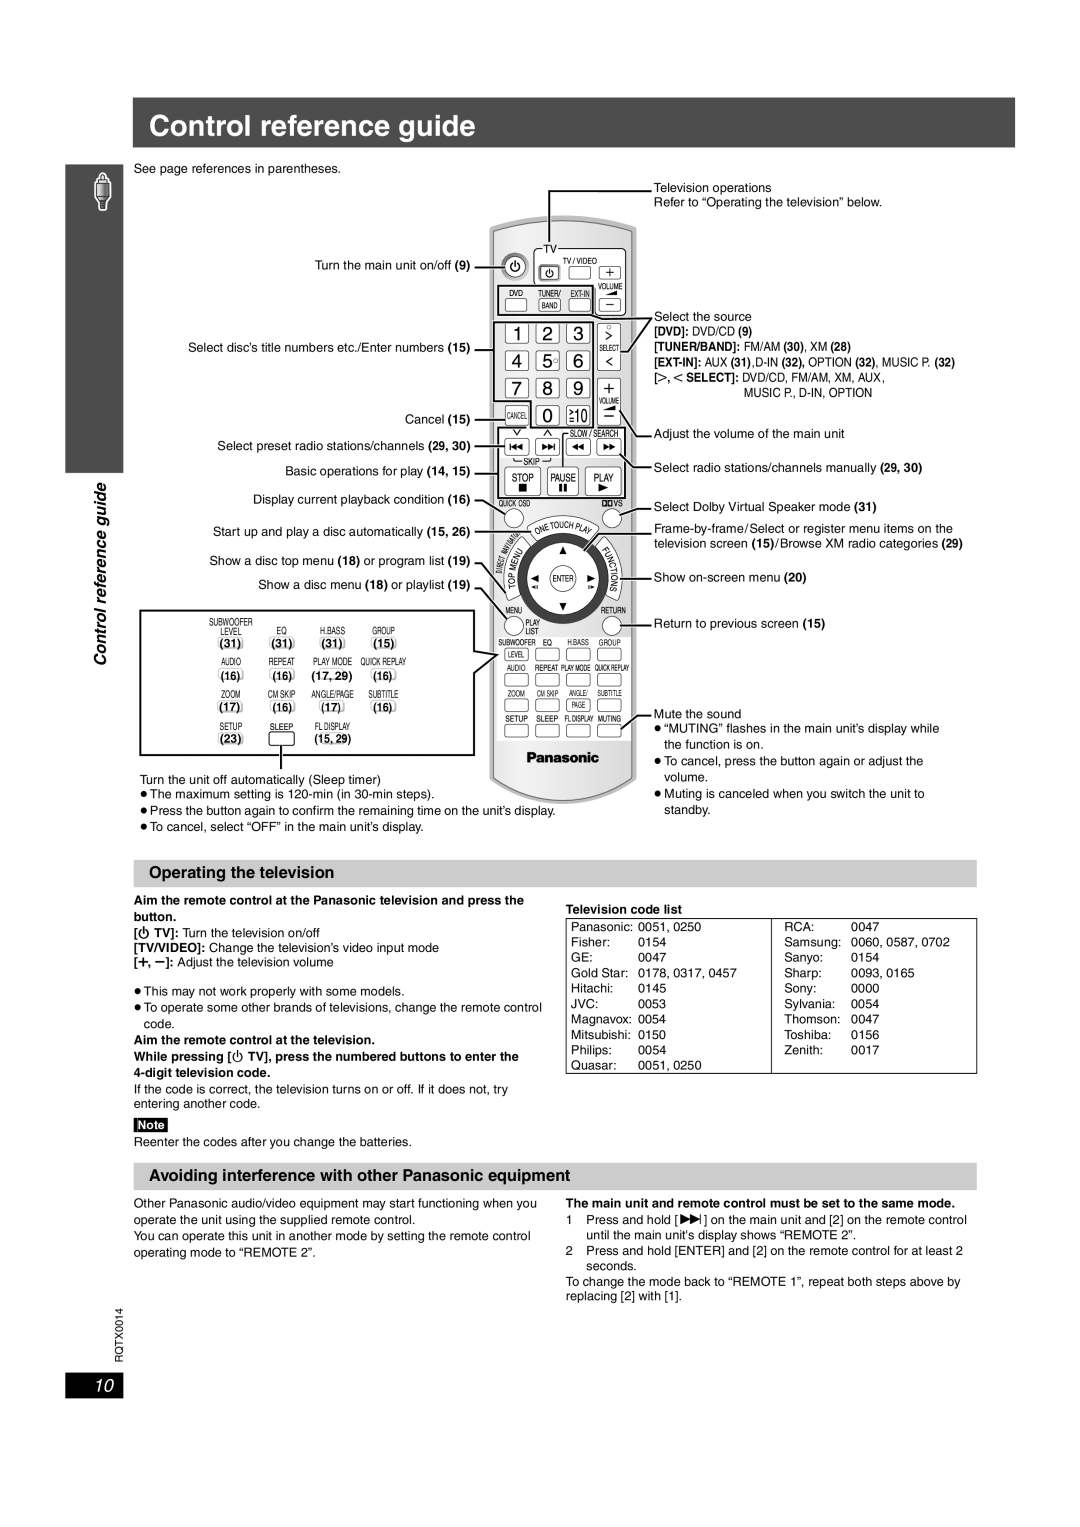 Panasonic SC-PTX5 manual Control reference guide, Operating the television 